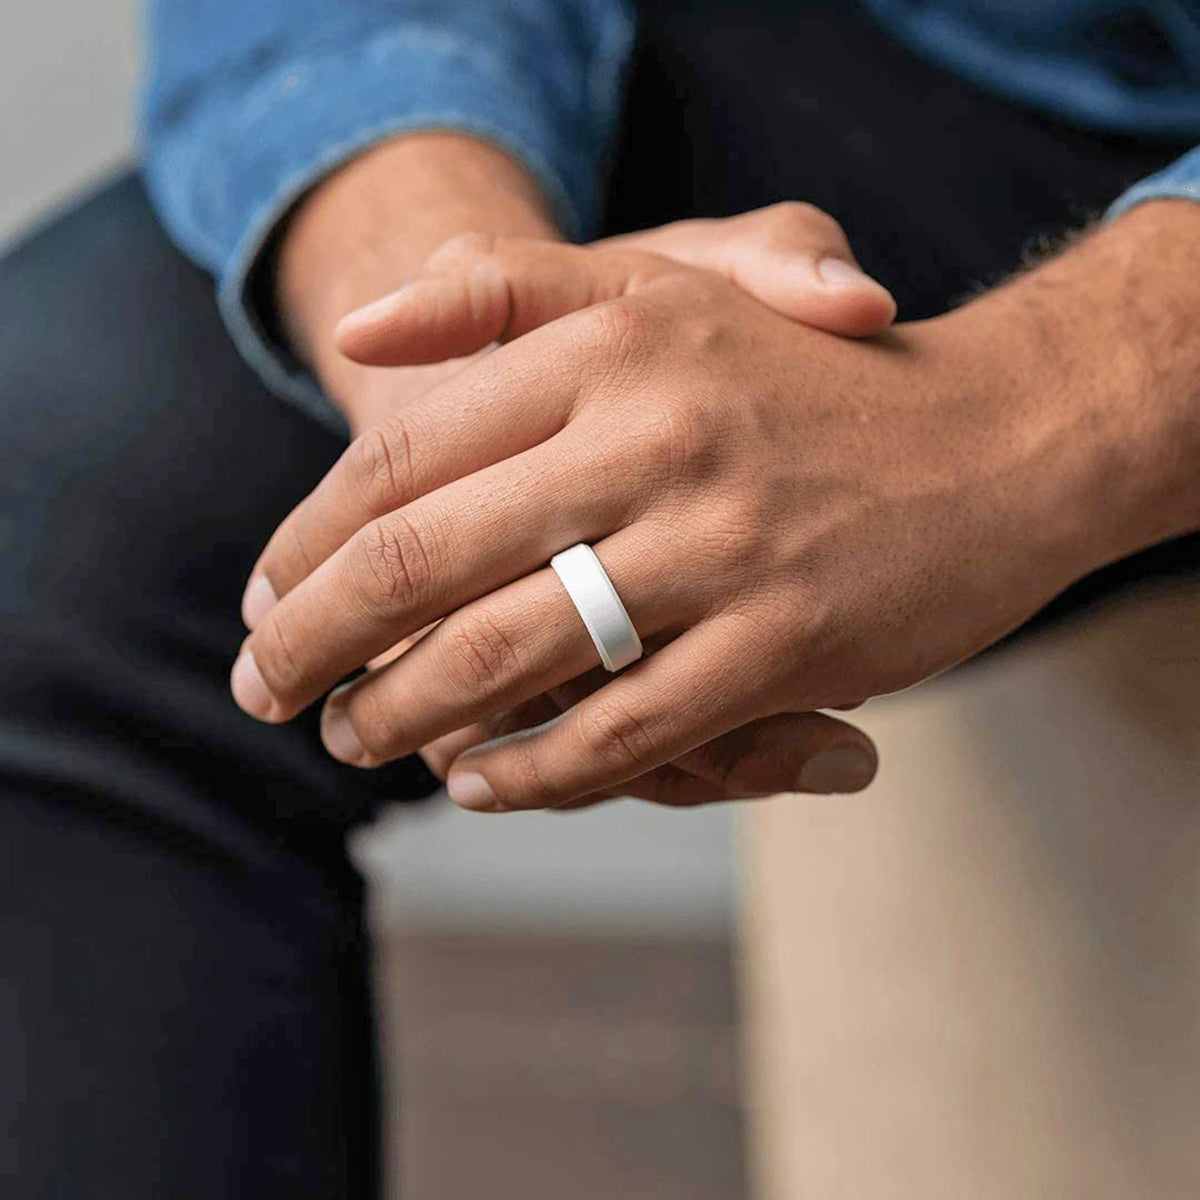 Enso Rings Classic Bevel Series Silicone Ring - Pine Enso Rings